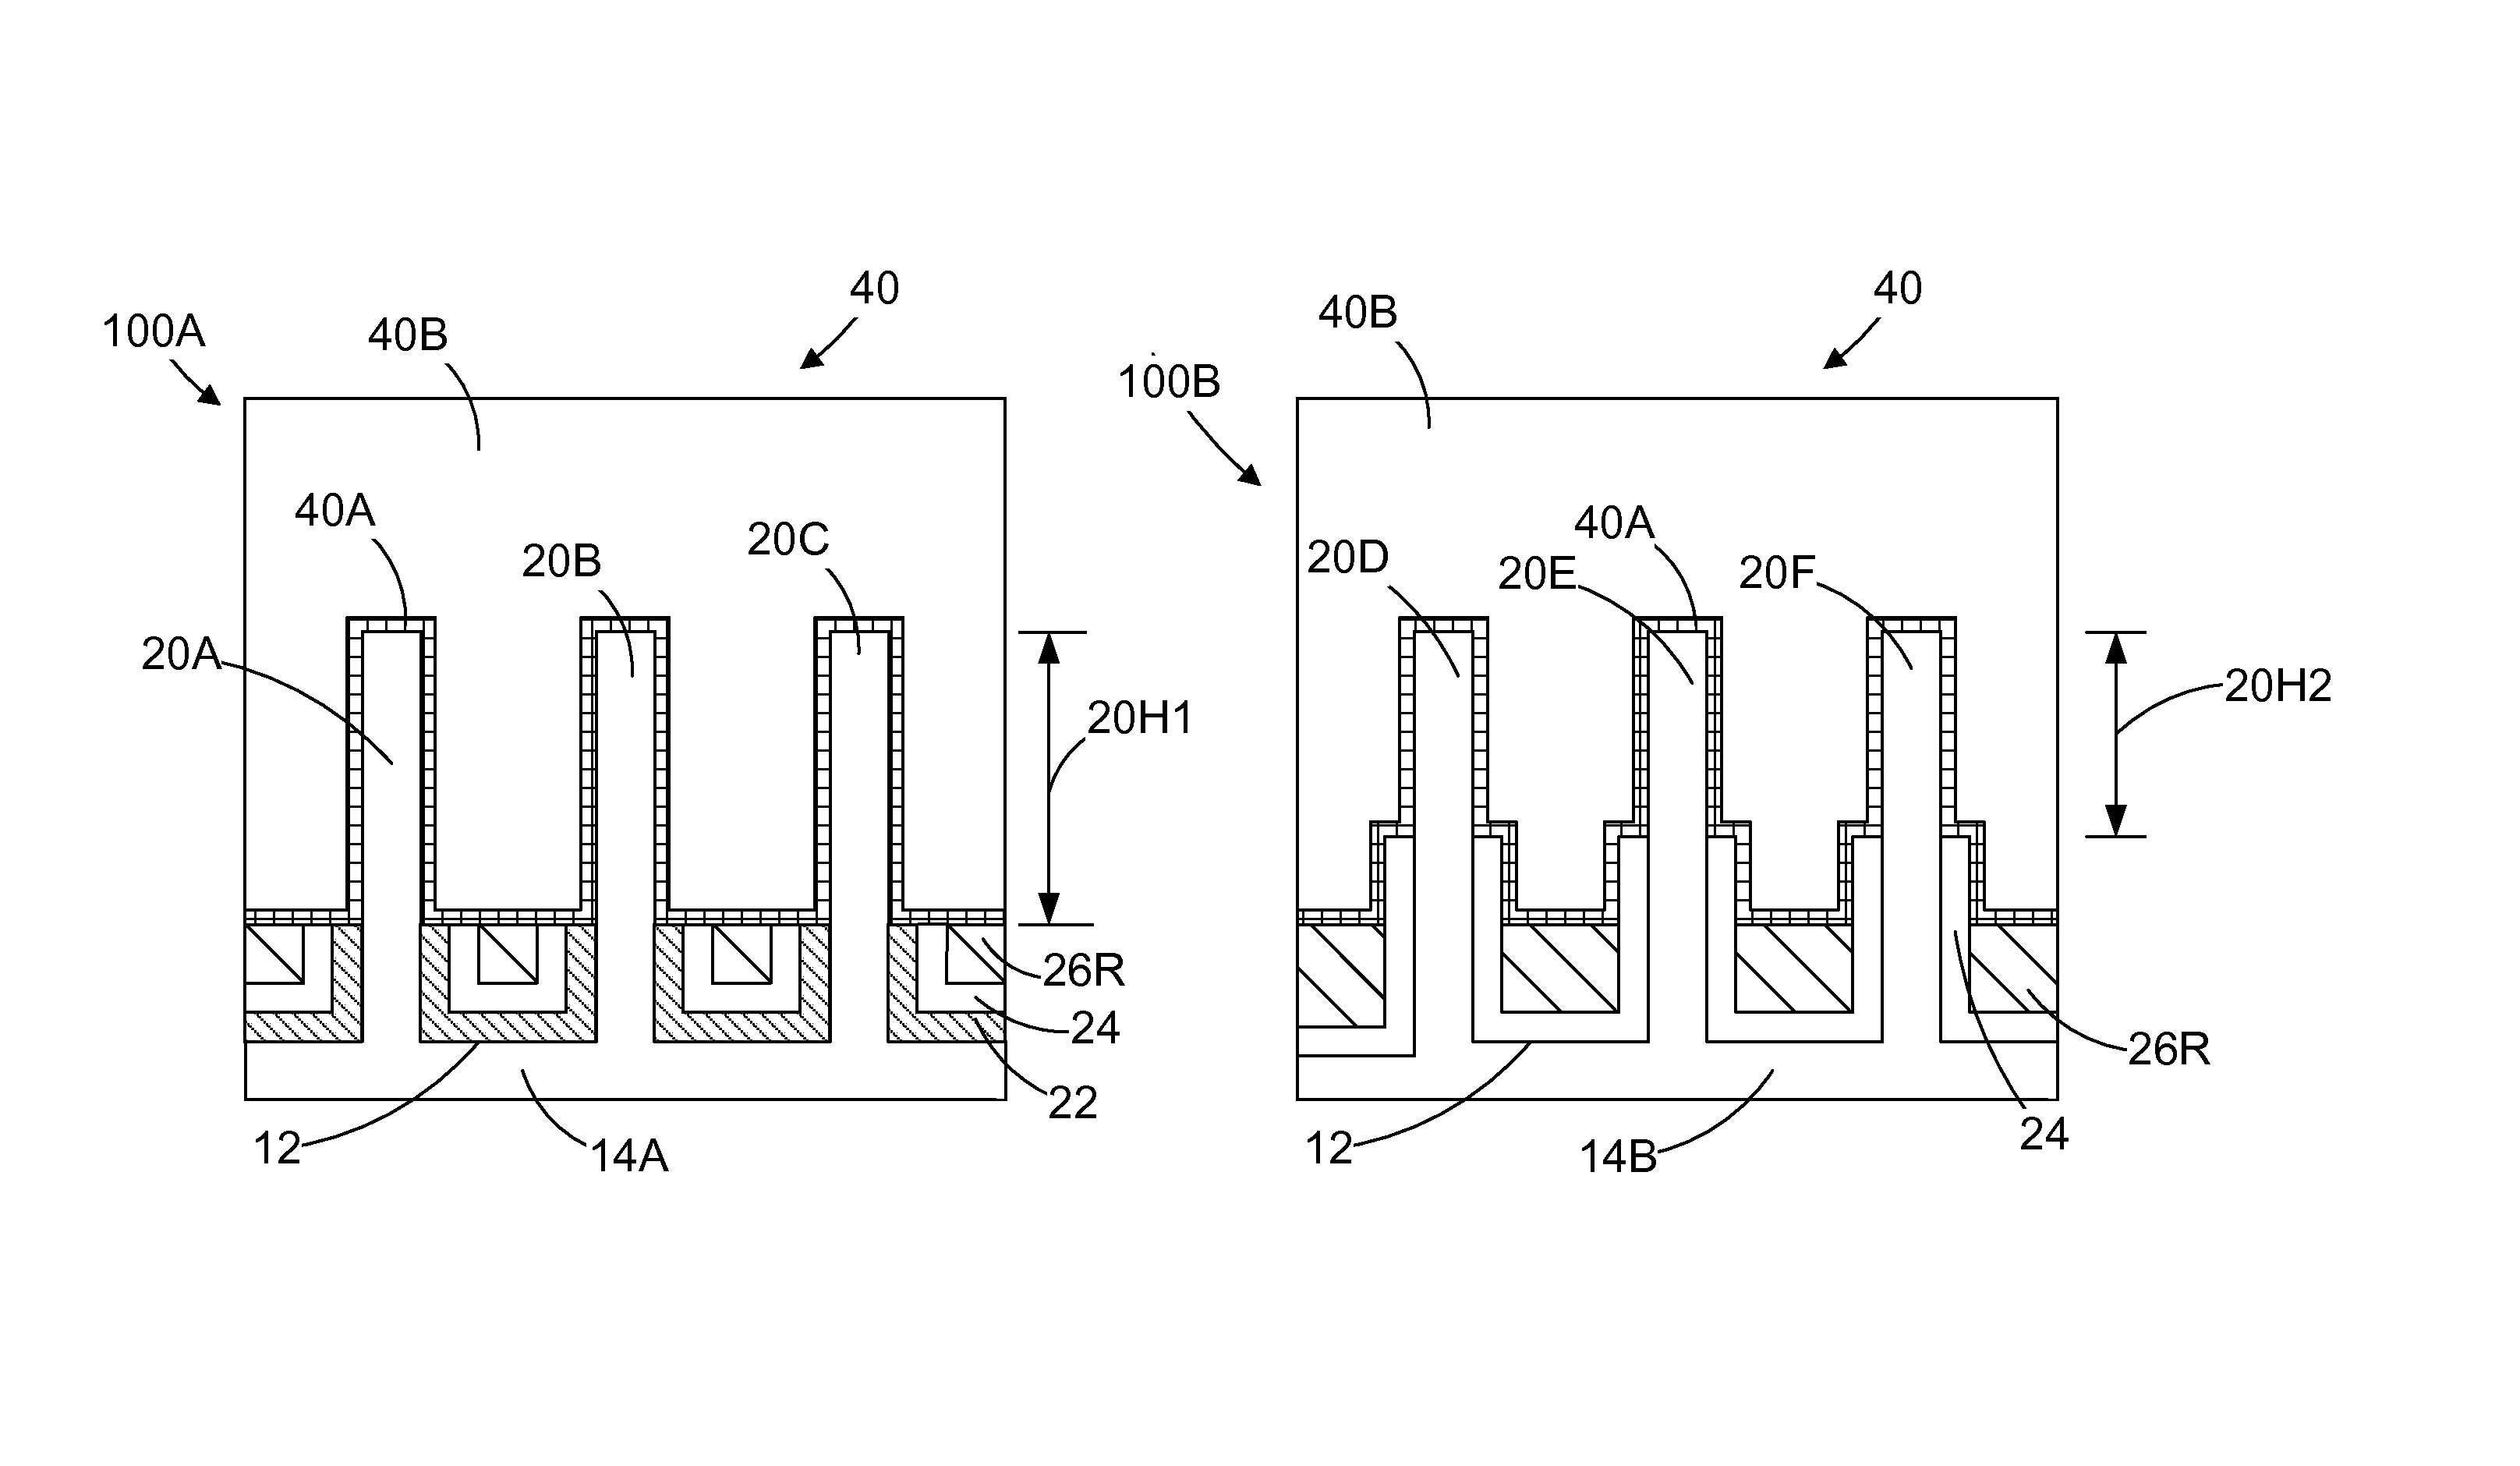 Methods of forming different FinFET devices having different fin heights and an integrated circuit product containing such devices